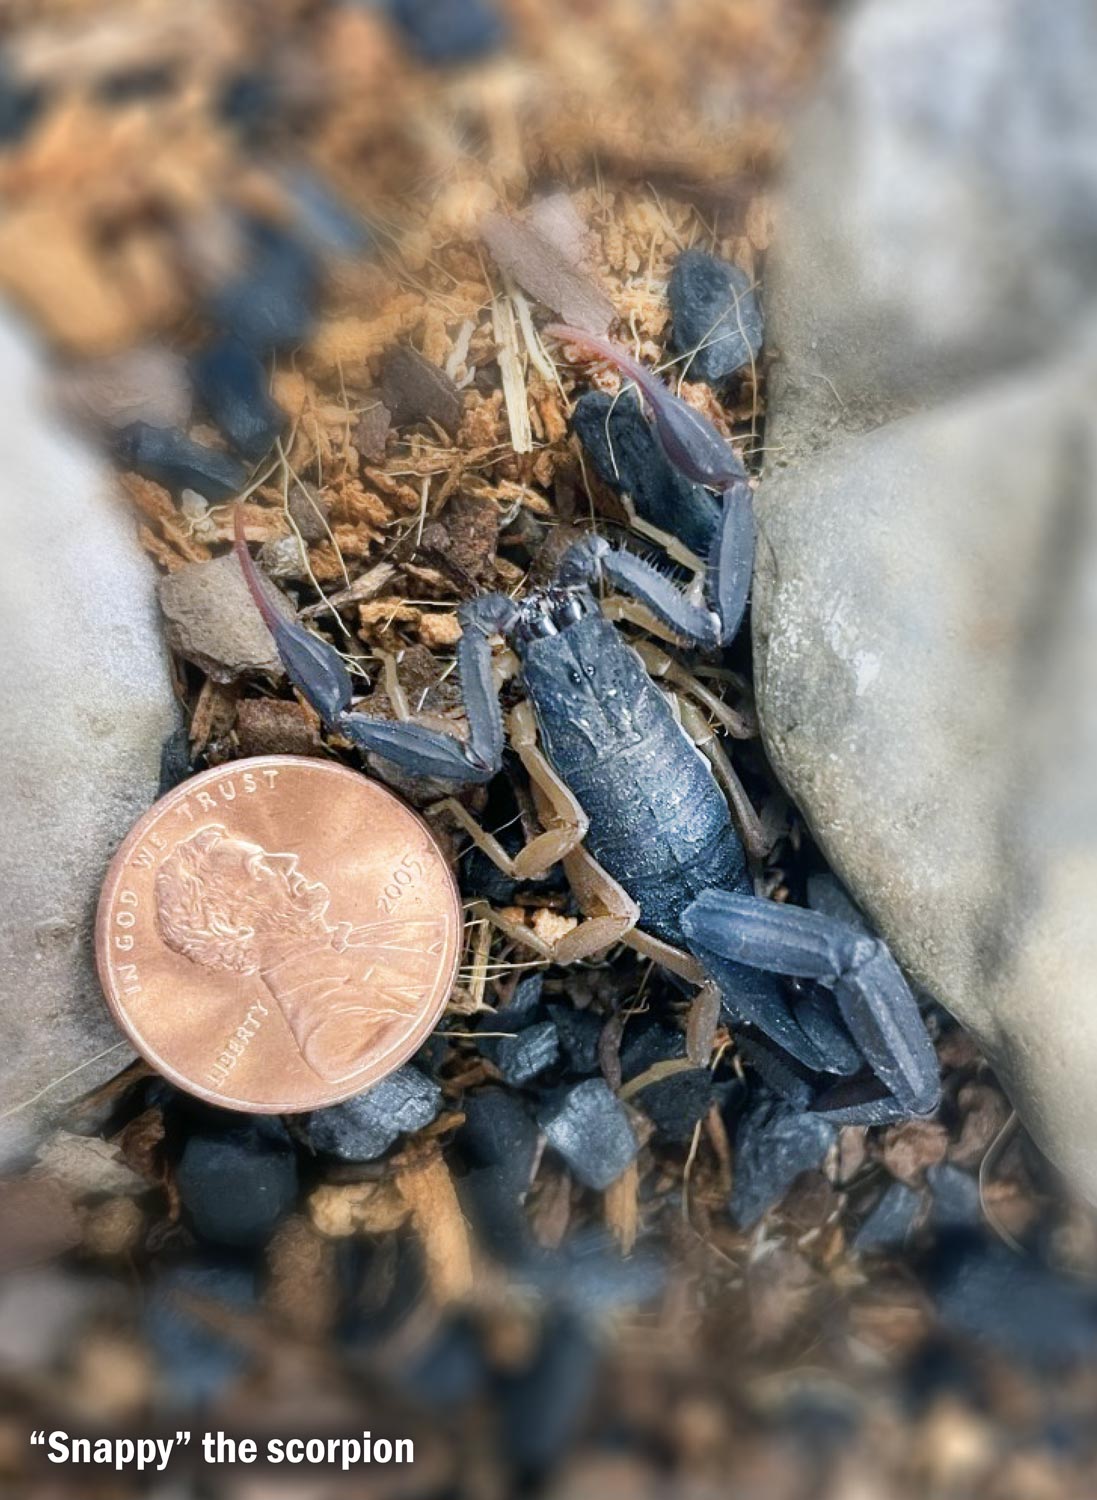 close view of "Snappy" the Scorpion next to a penny for scale